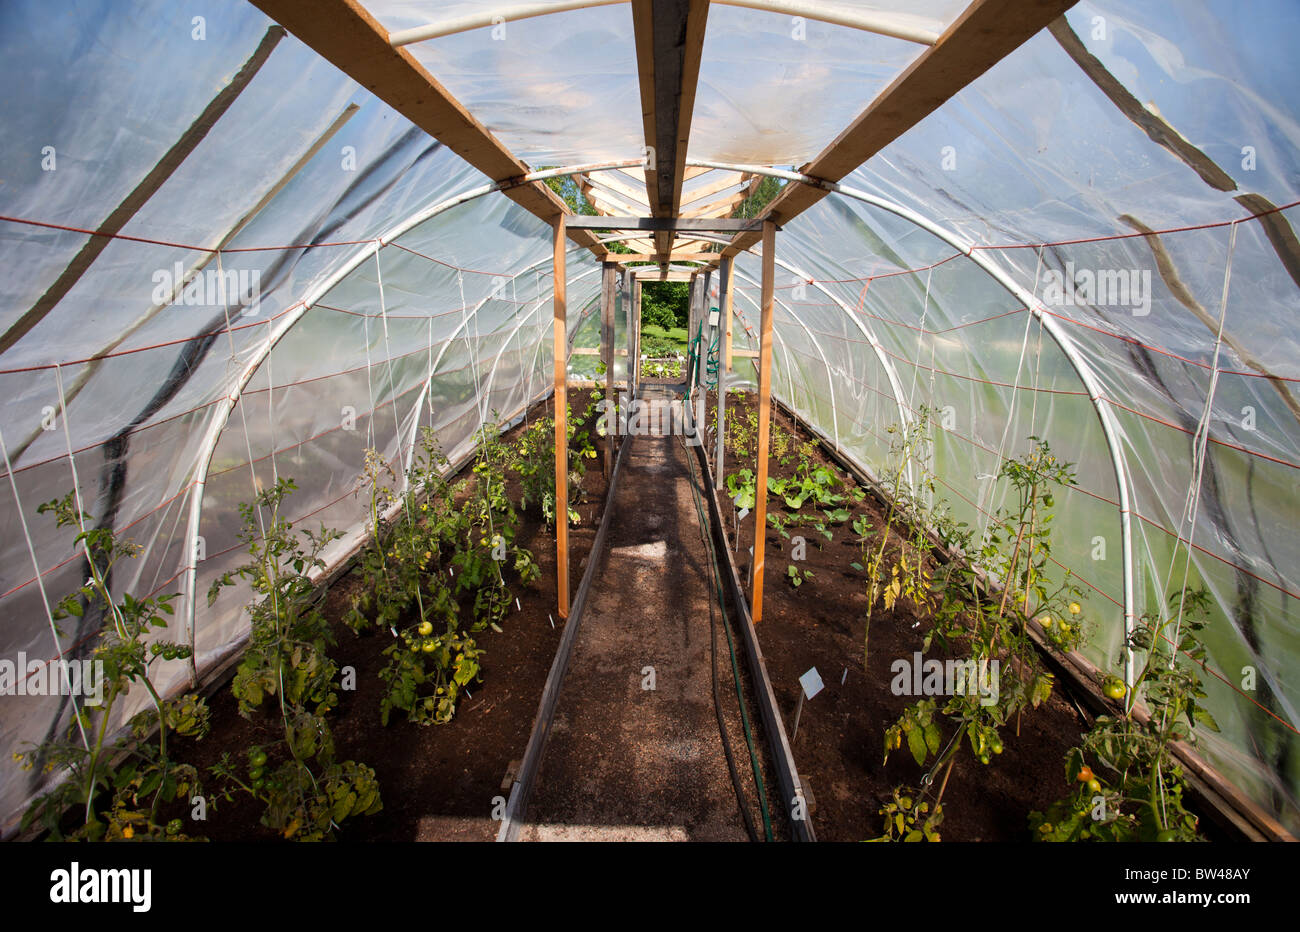 Interior of a simple homemade plastic covered greenhouse used to grow tomatoes and other vegetables , Finland Stock Photo